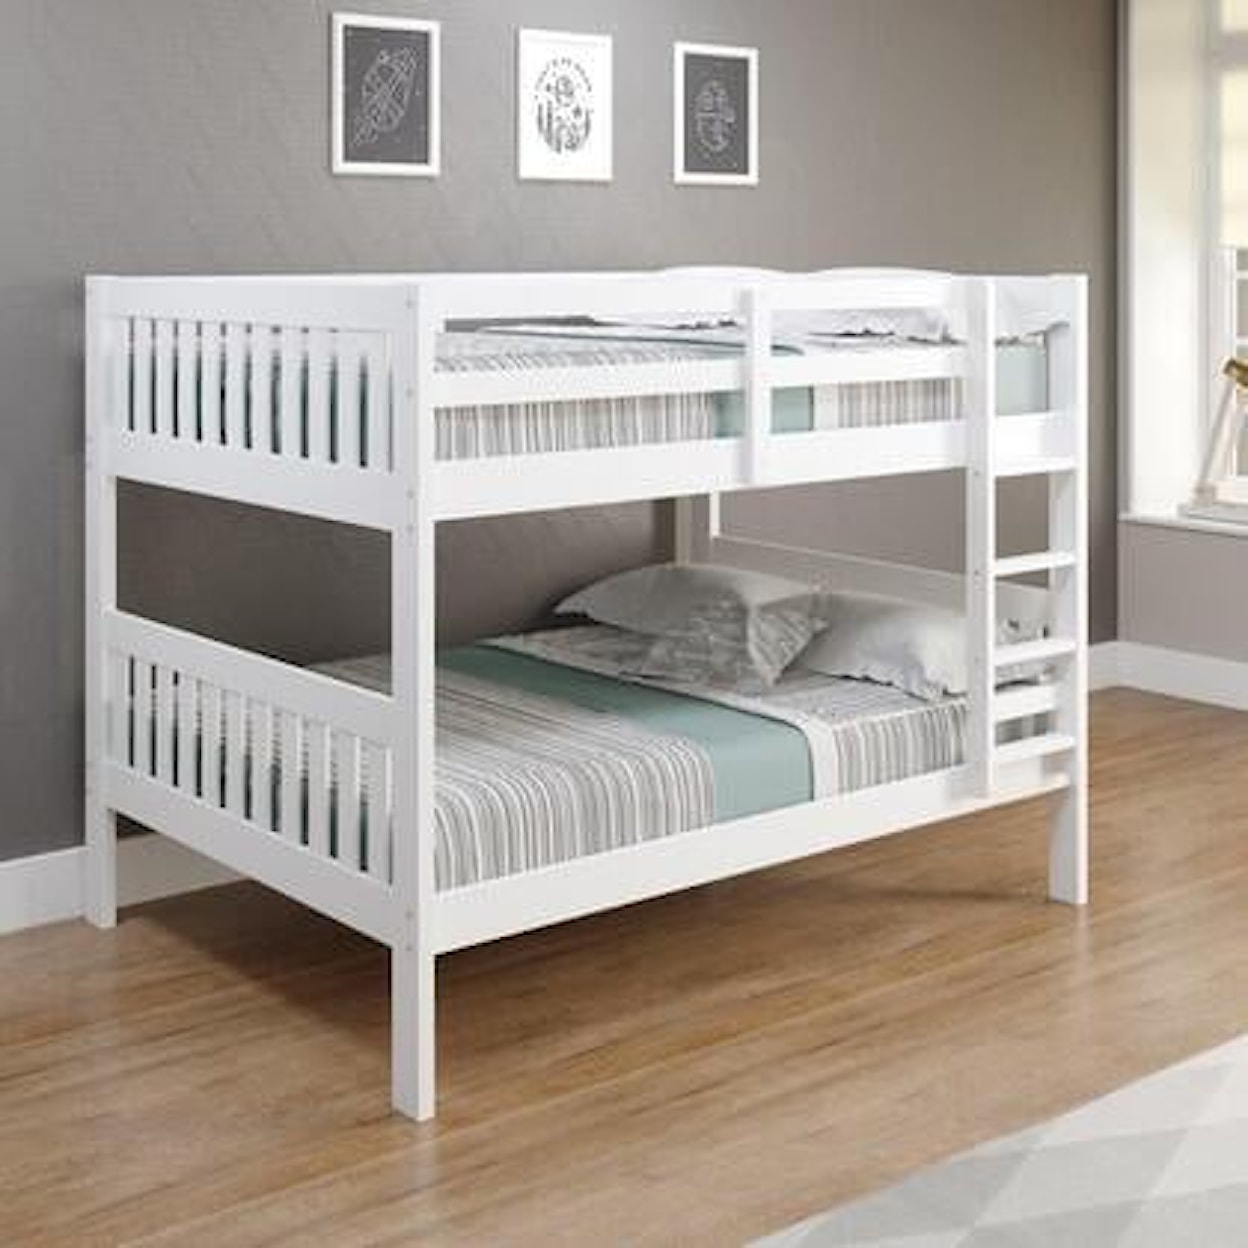 Donco Trading Co Bunkbeds MISSION WHITE FULL/FULL BUNK | BED